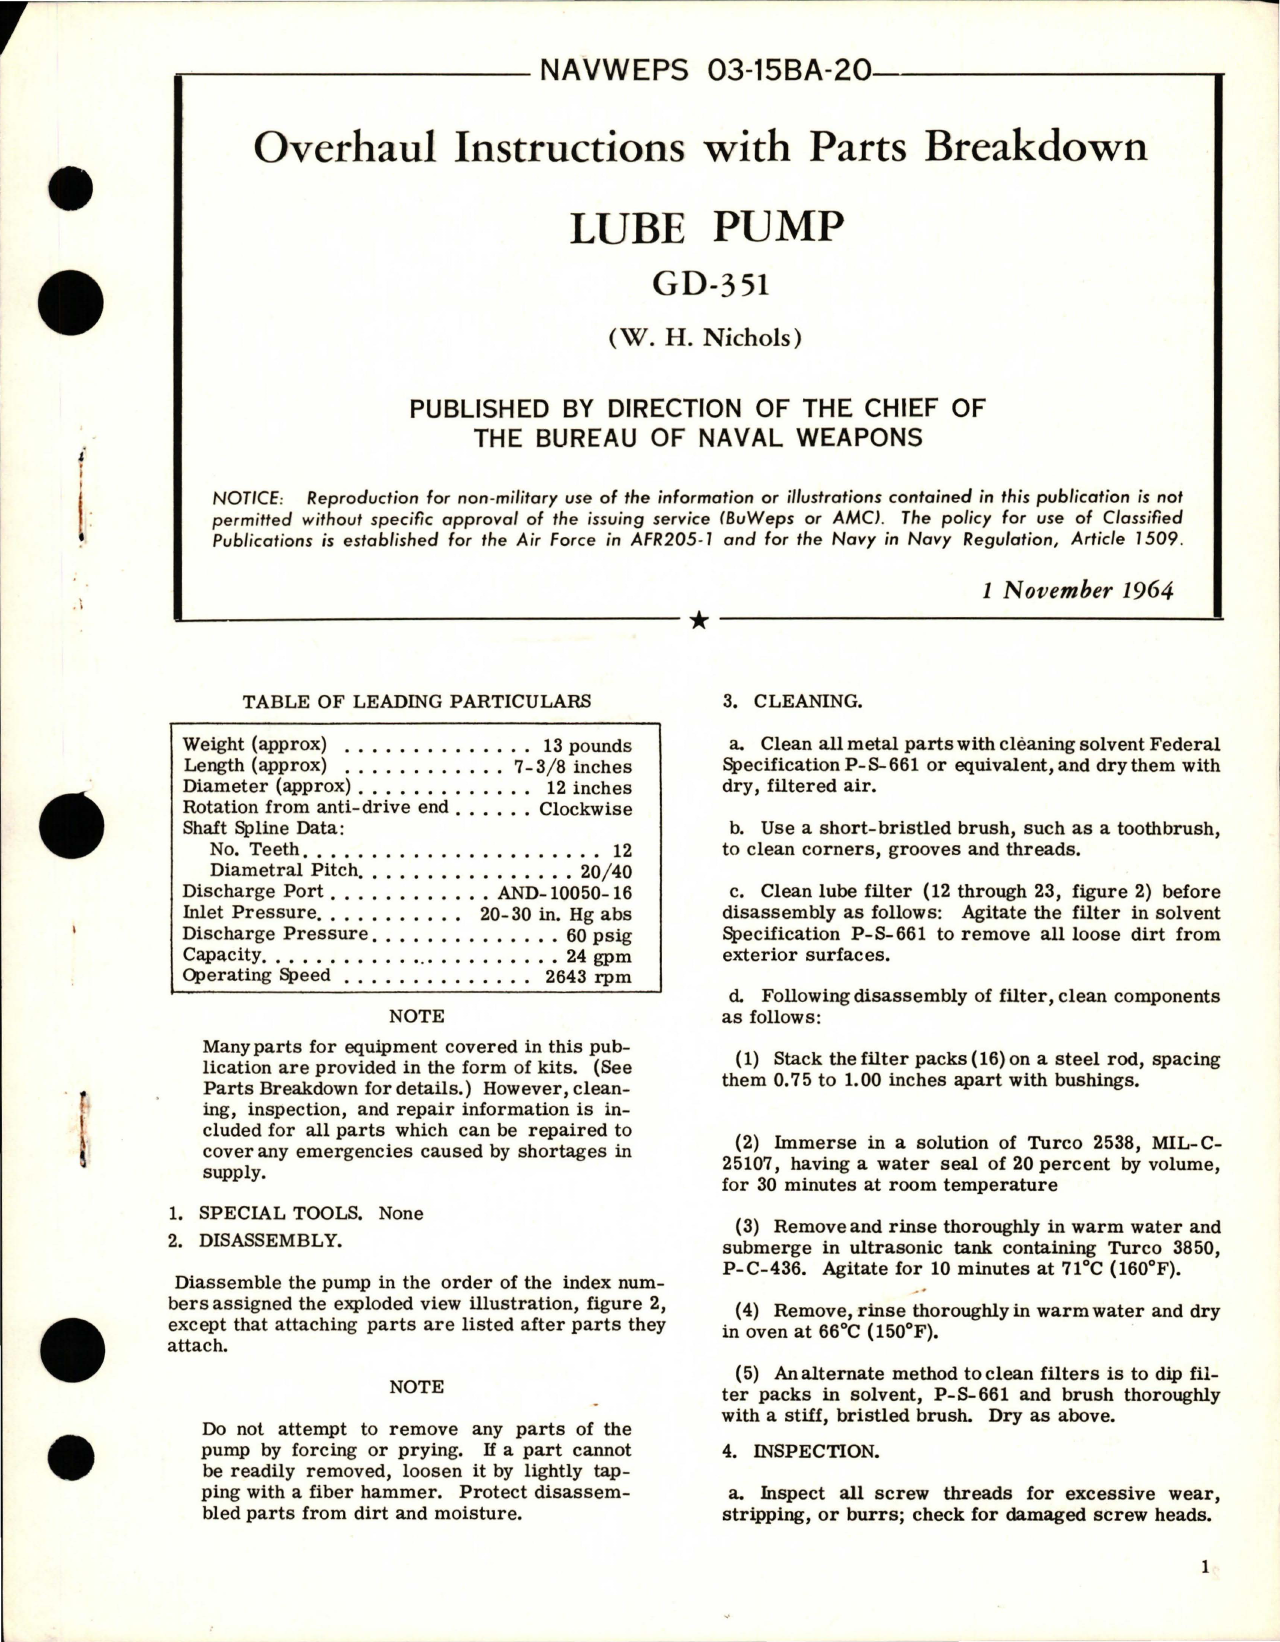 Sample page 1 from AirCorps Library document: Overhaul Instructions with Parts for Lube Pump - GD-351